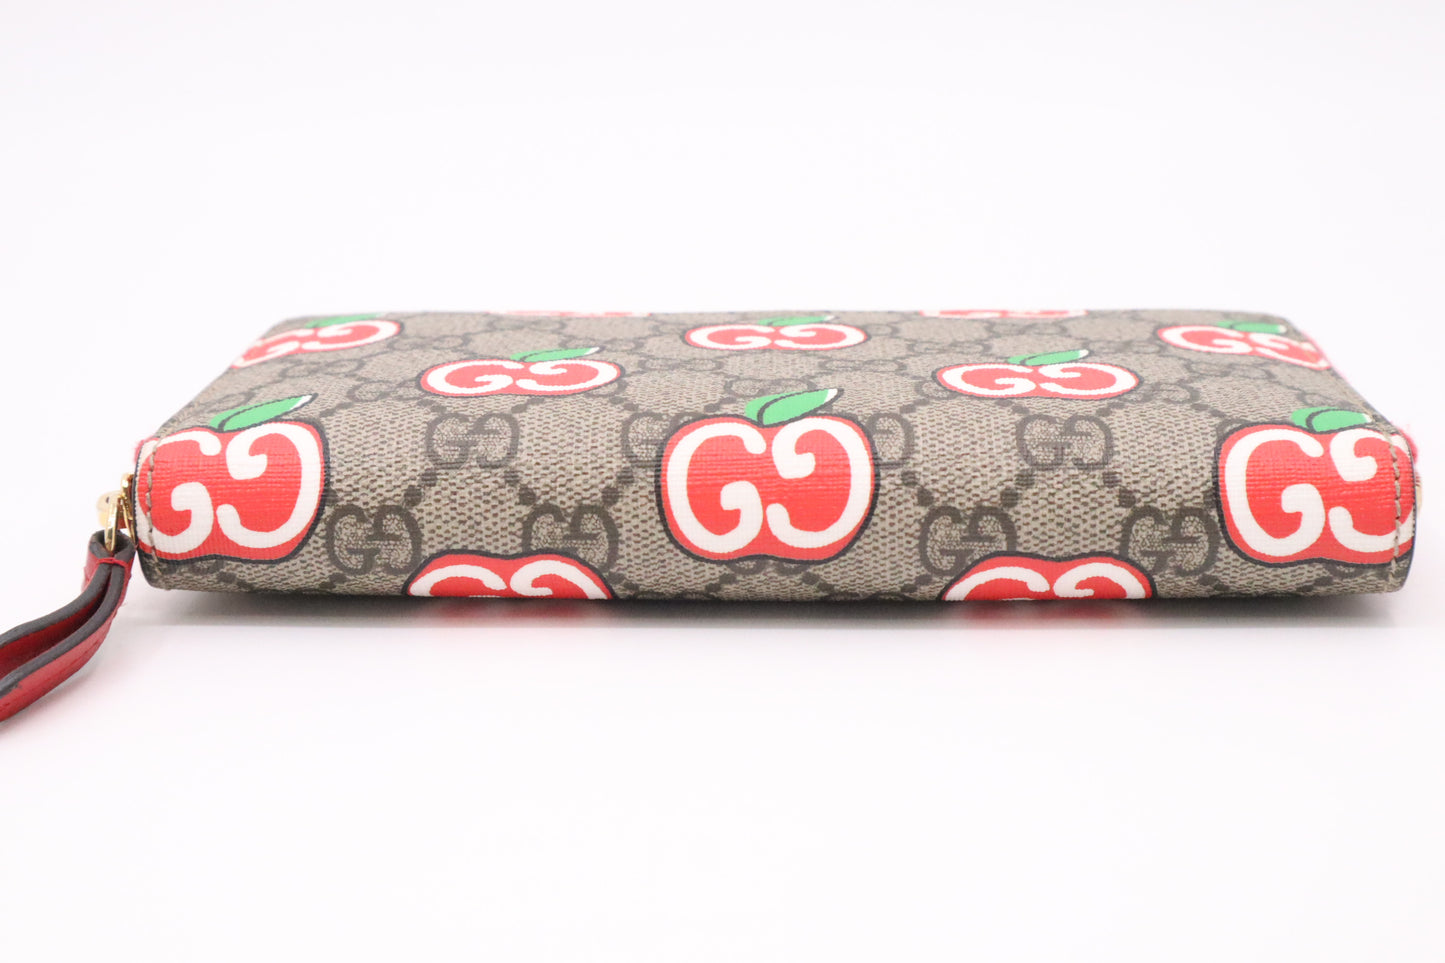 Gucci Long Wallet in GG Supreme Apples Canvas